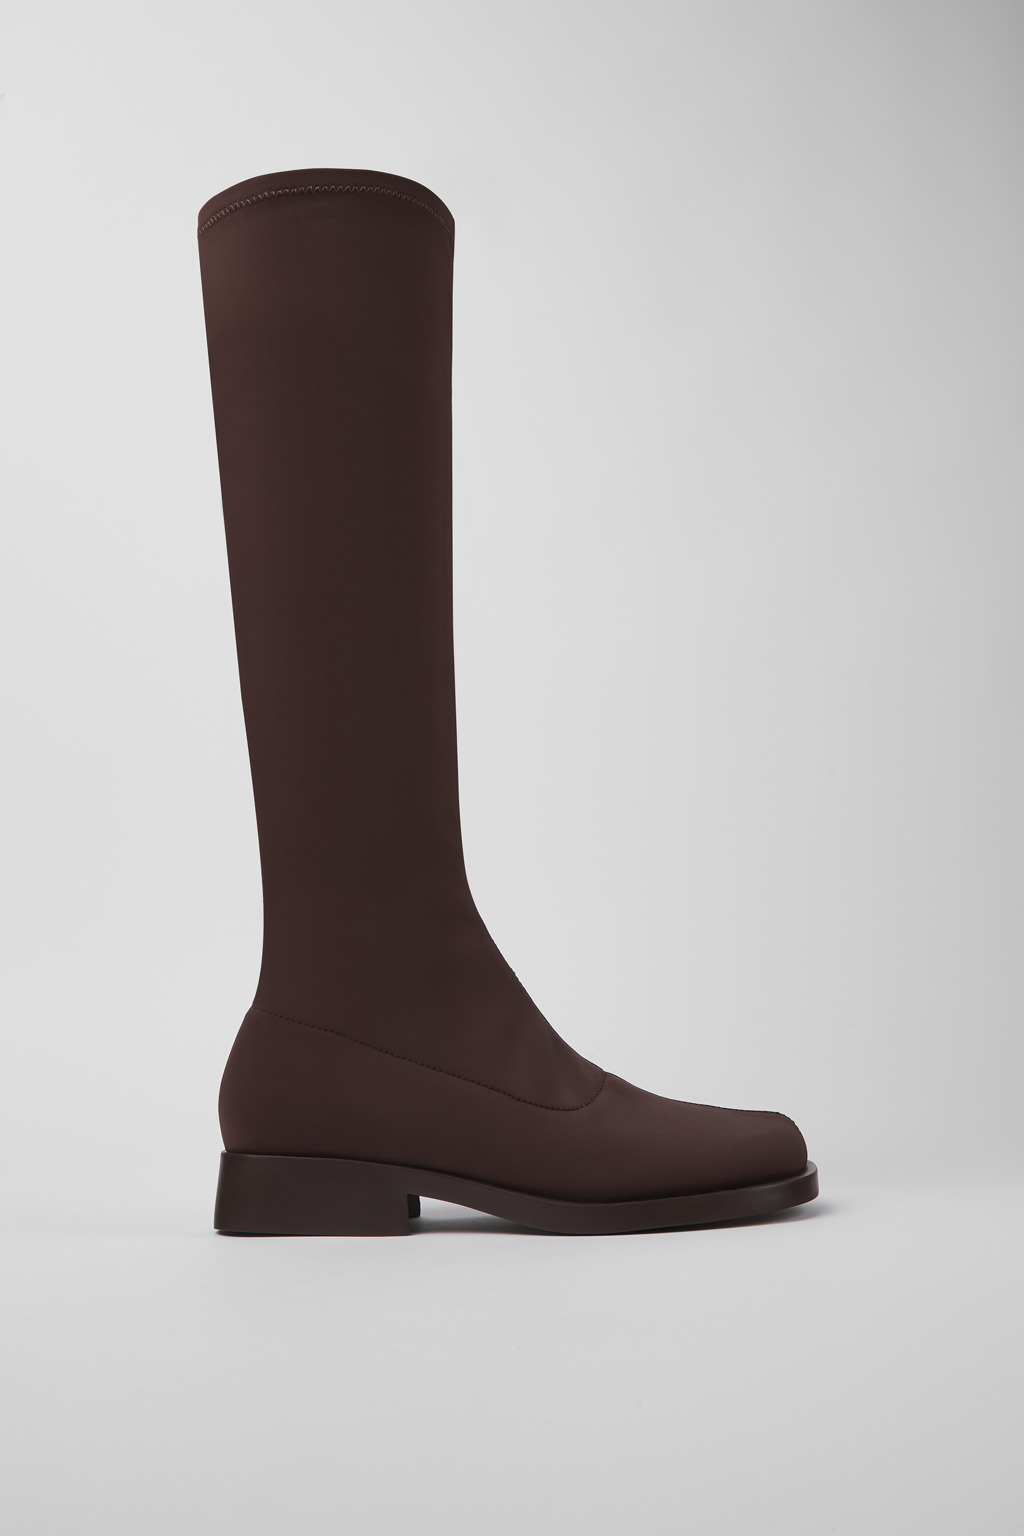 Boots for Women - Fall/Winter| Camper® Spain